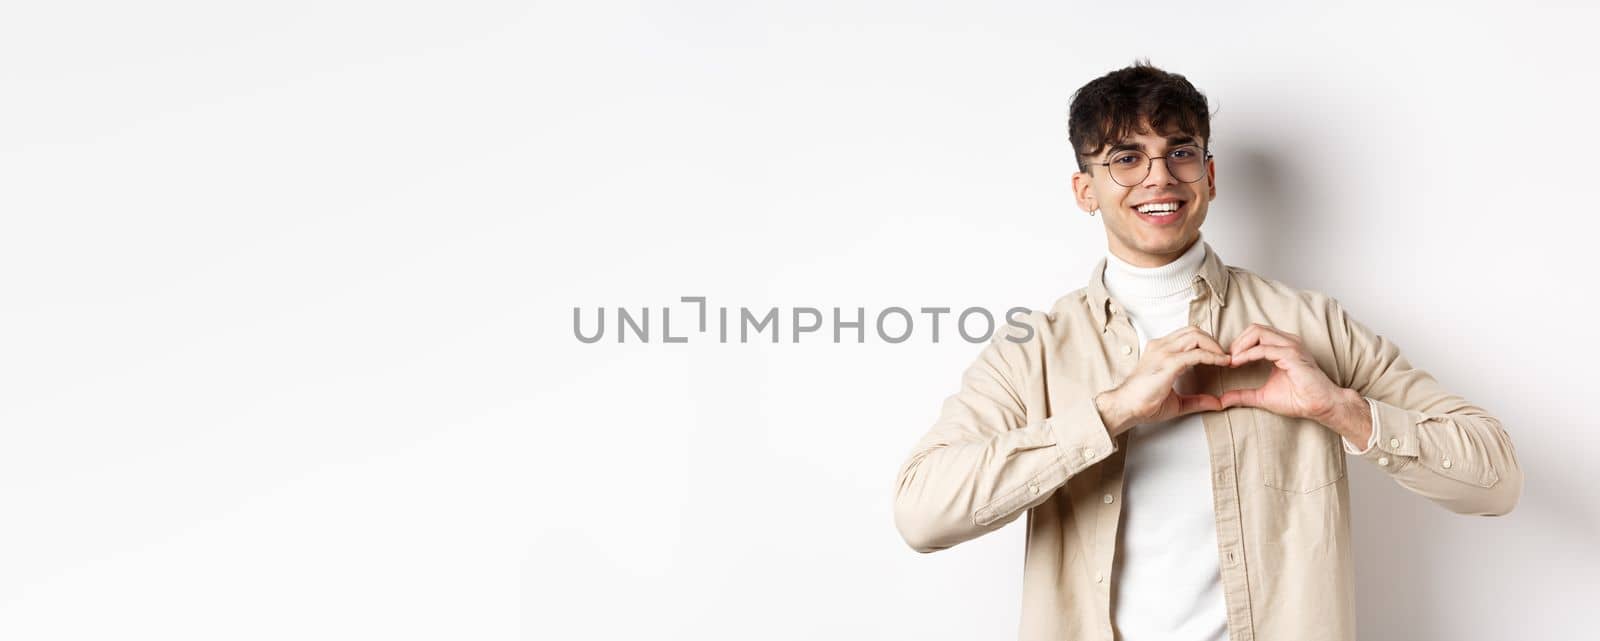 Happy Valentines. Handsome young man in glasses say I love you, showing heart sign and smiling at girlfriend, celebrating lovers day, standing over white background.